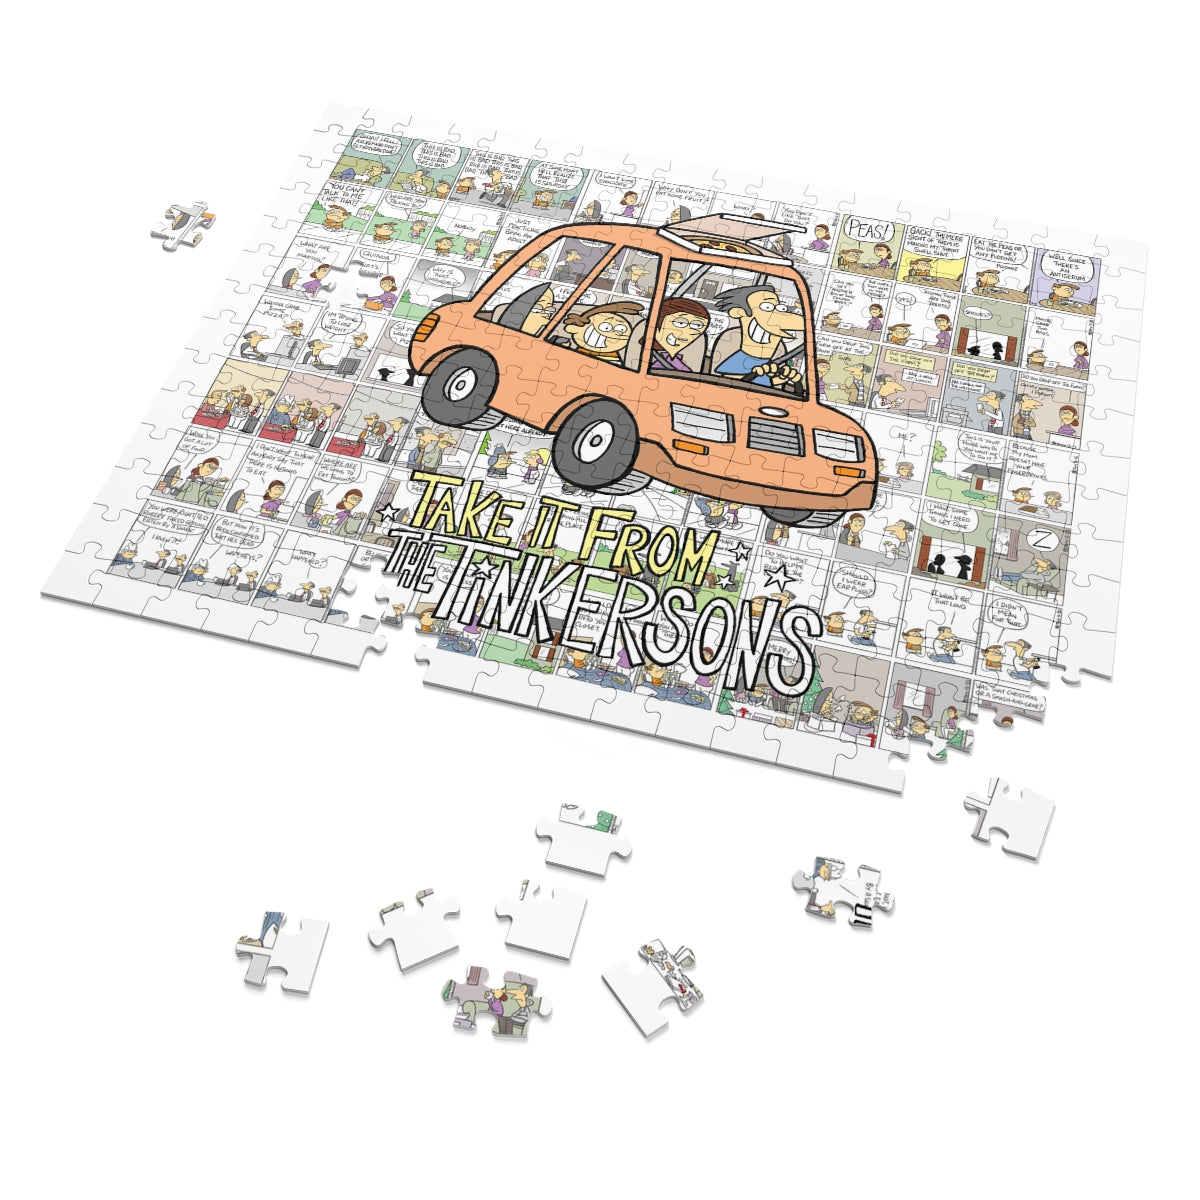 TAKE IT FROM THE TINKERSONS Jigsaw Puzzle (252 or 1000-Piece)